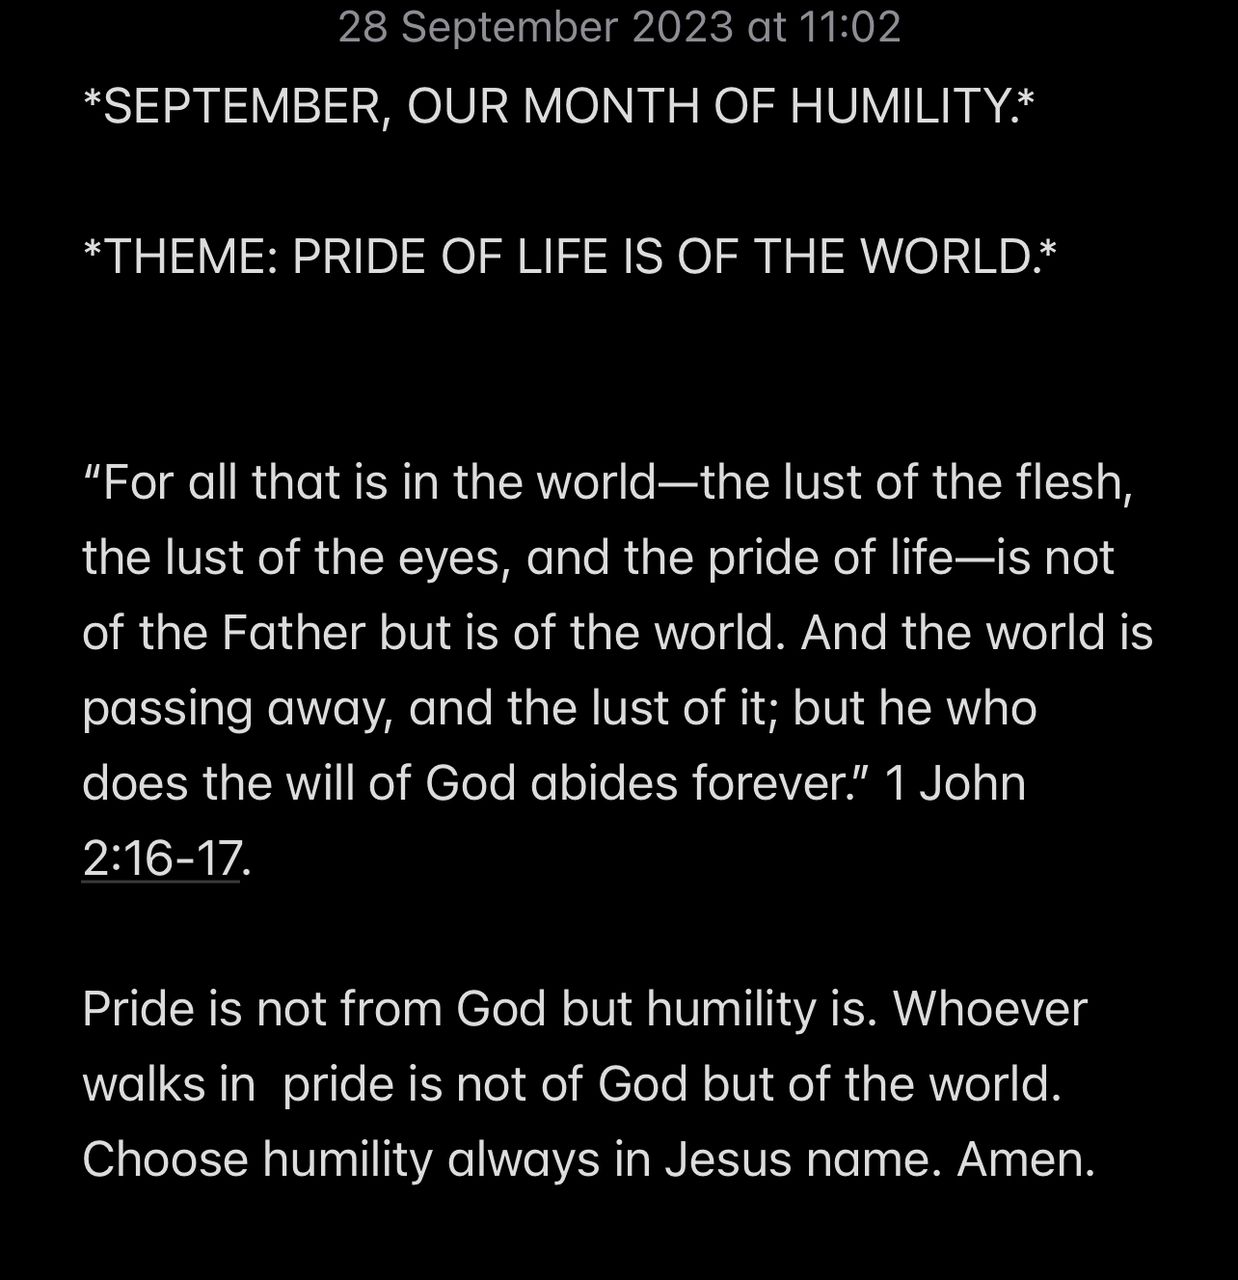 PRIDE OF LIFE IS OF THE WORLD